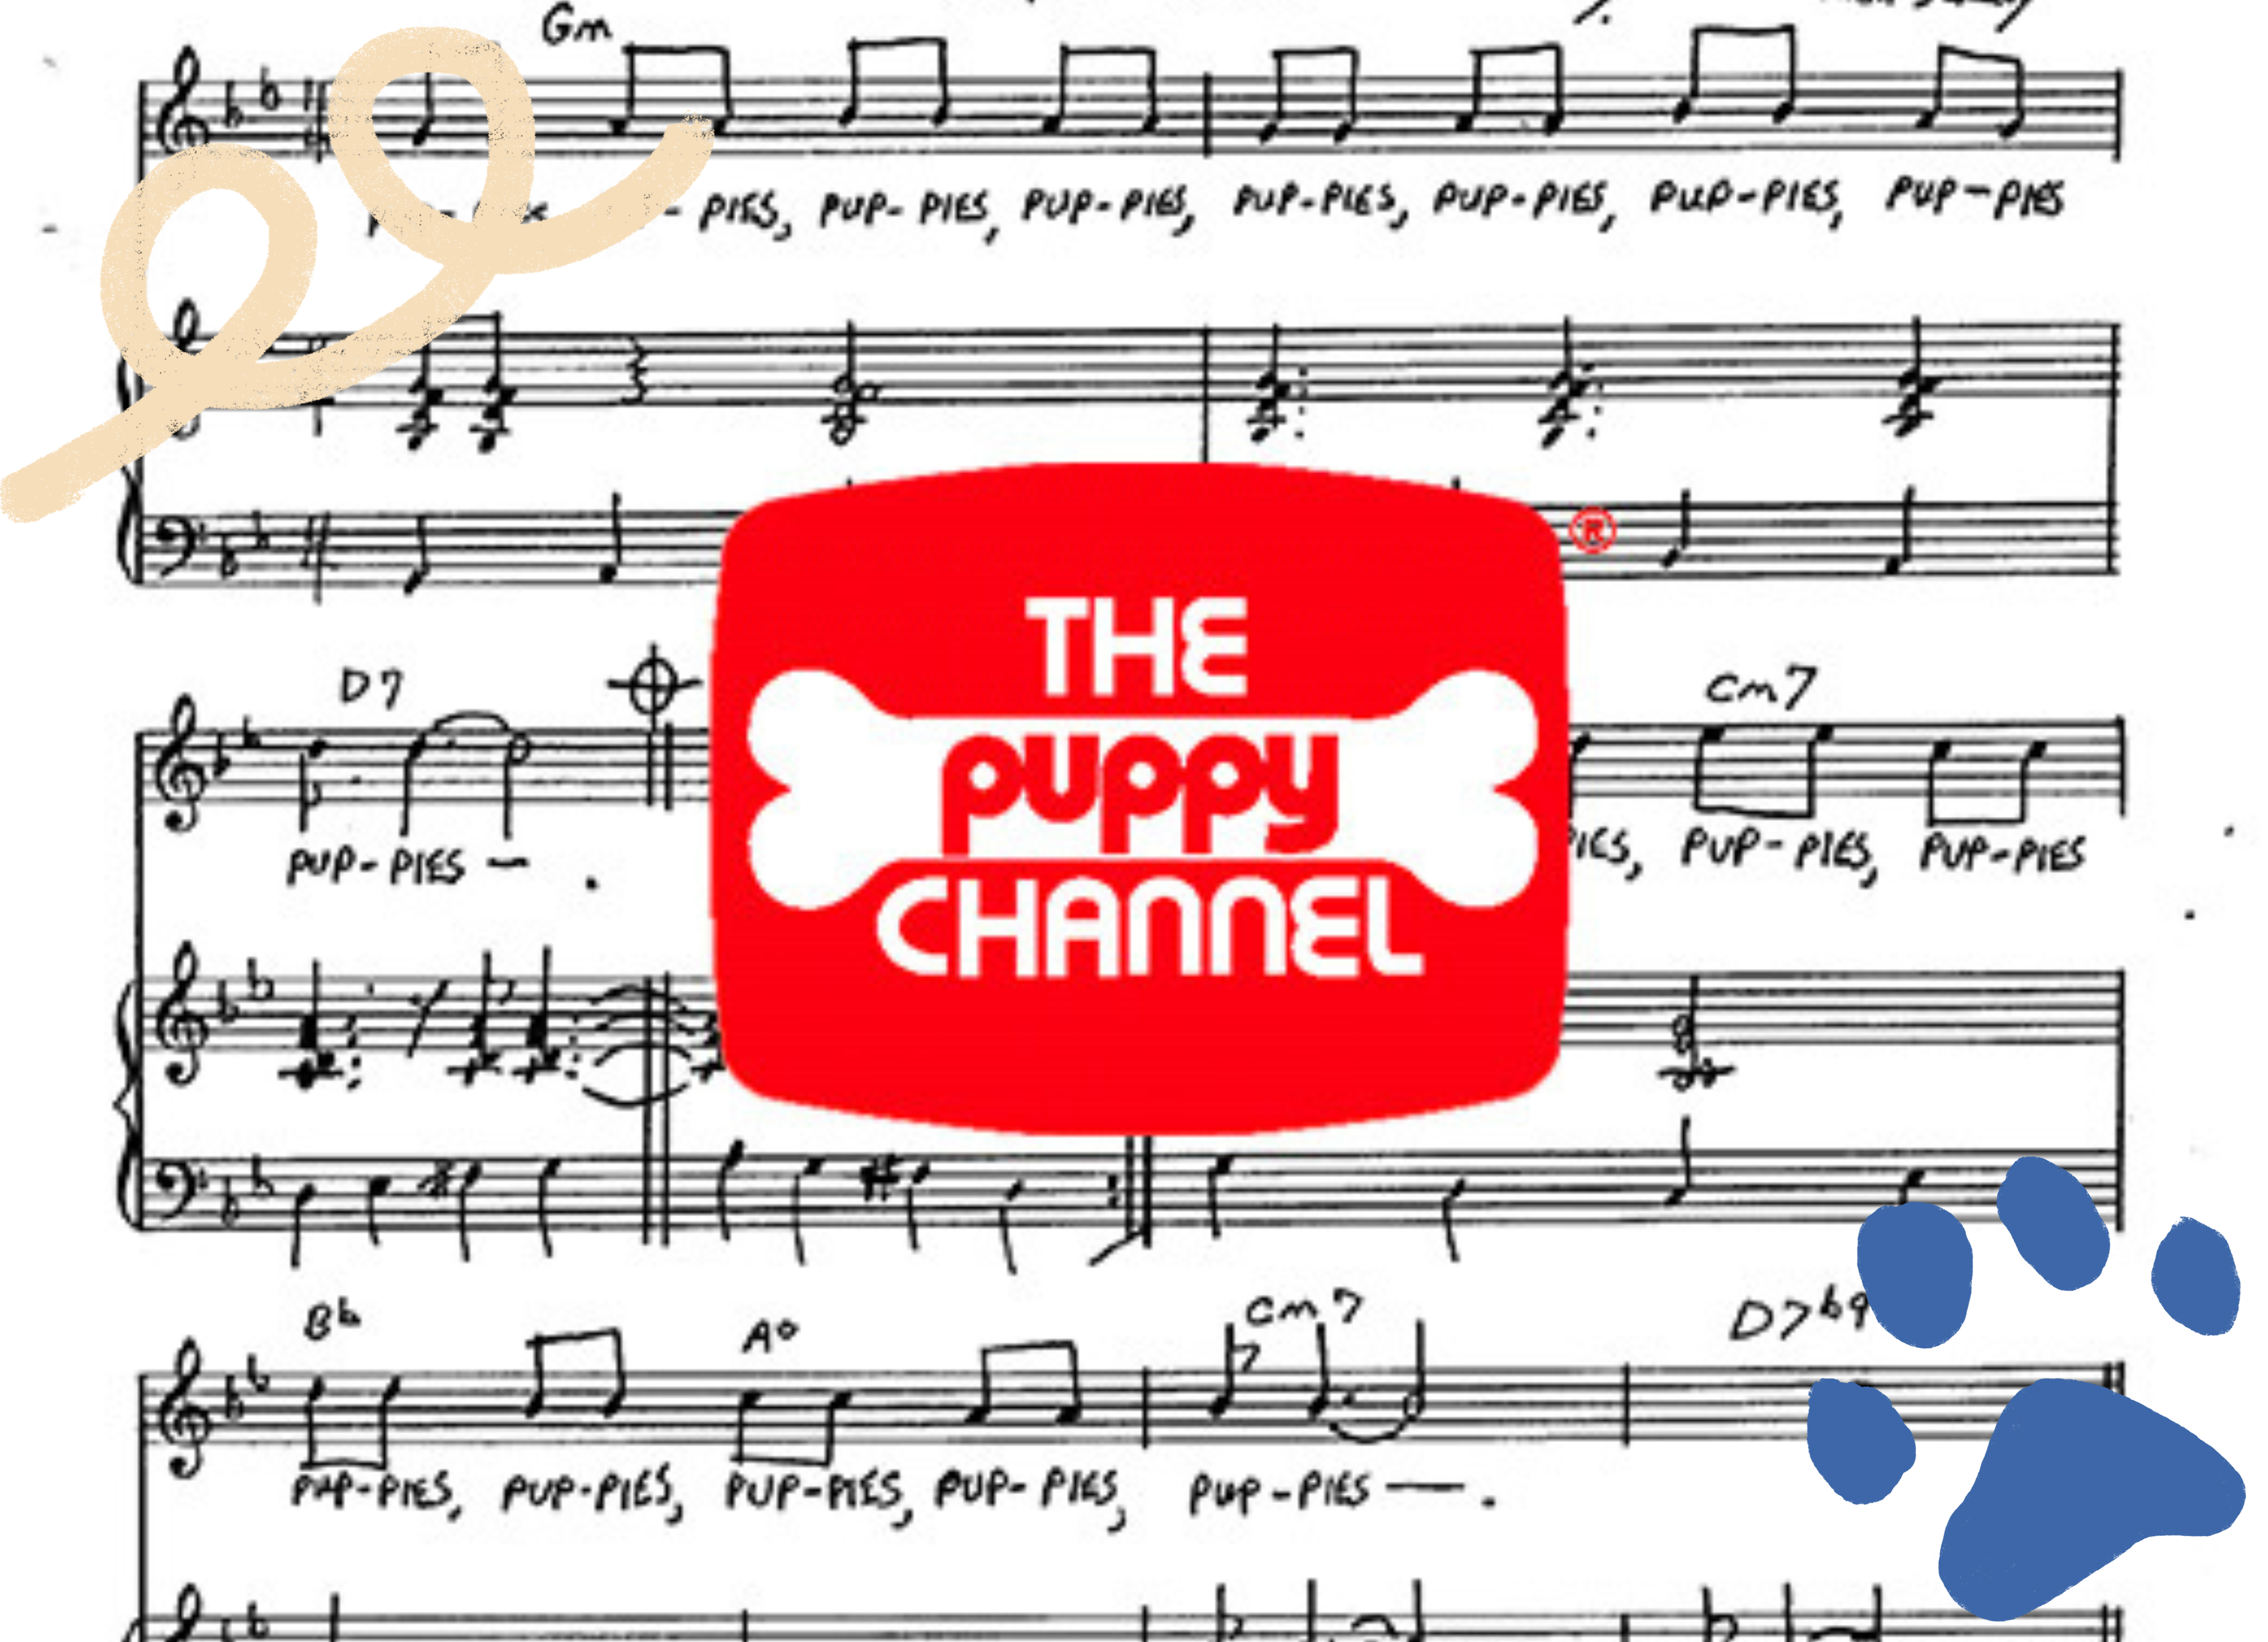 Sheet music and logo for The Puppy Channel